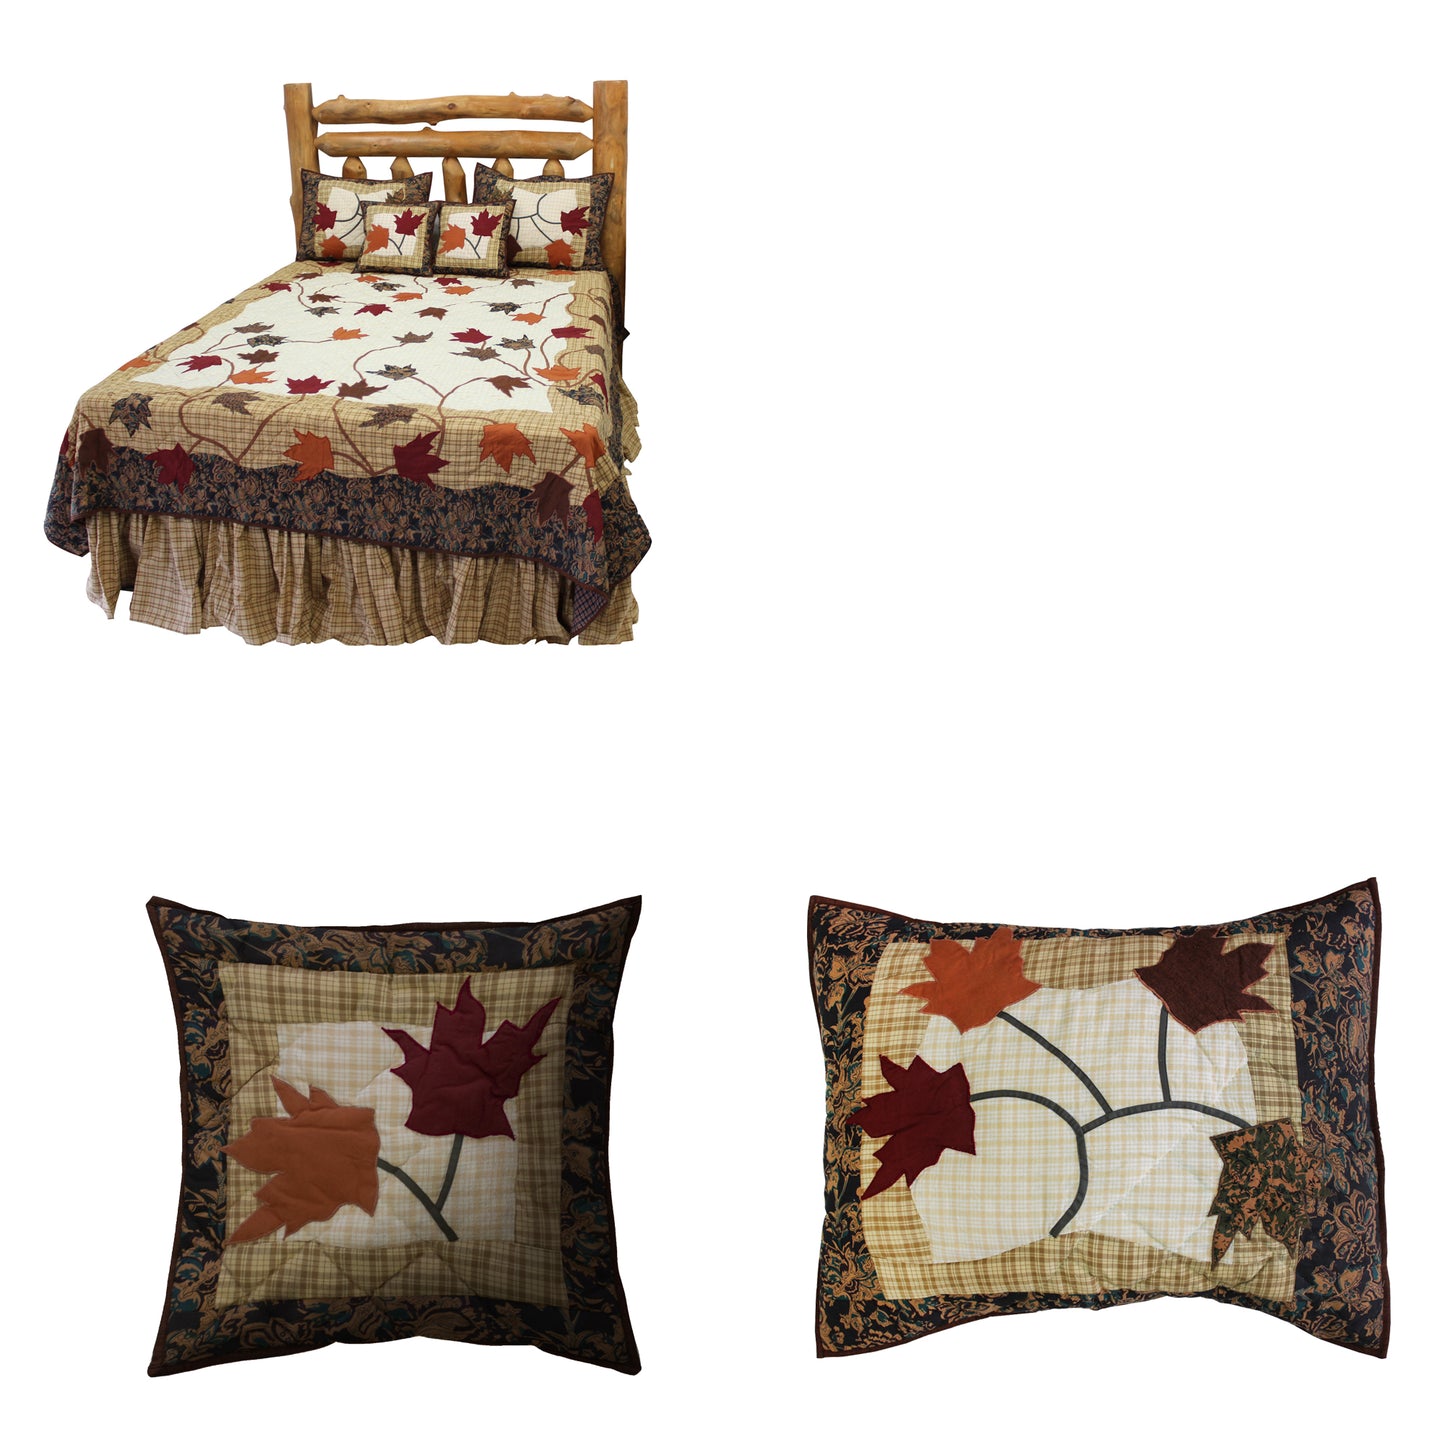 Autumn Bliss Bedding accessories and Ensemble sets.